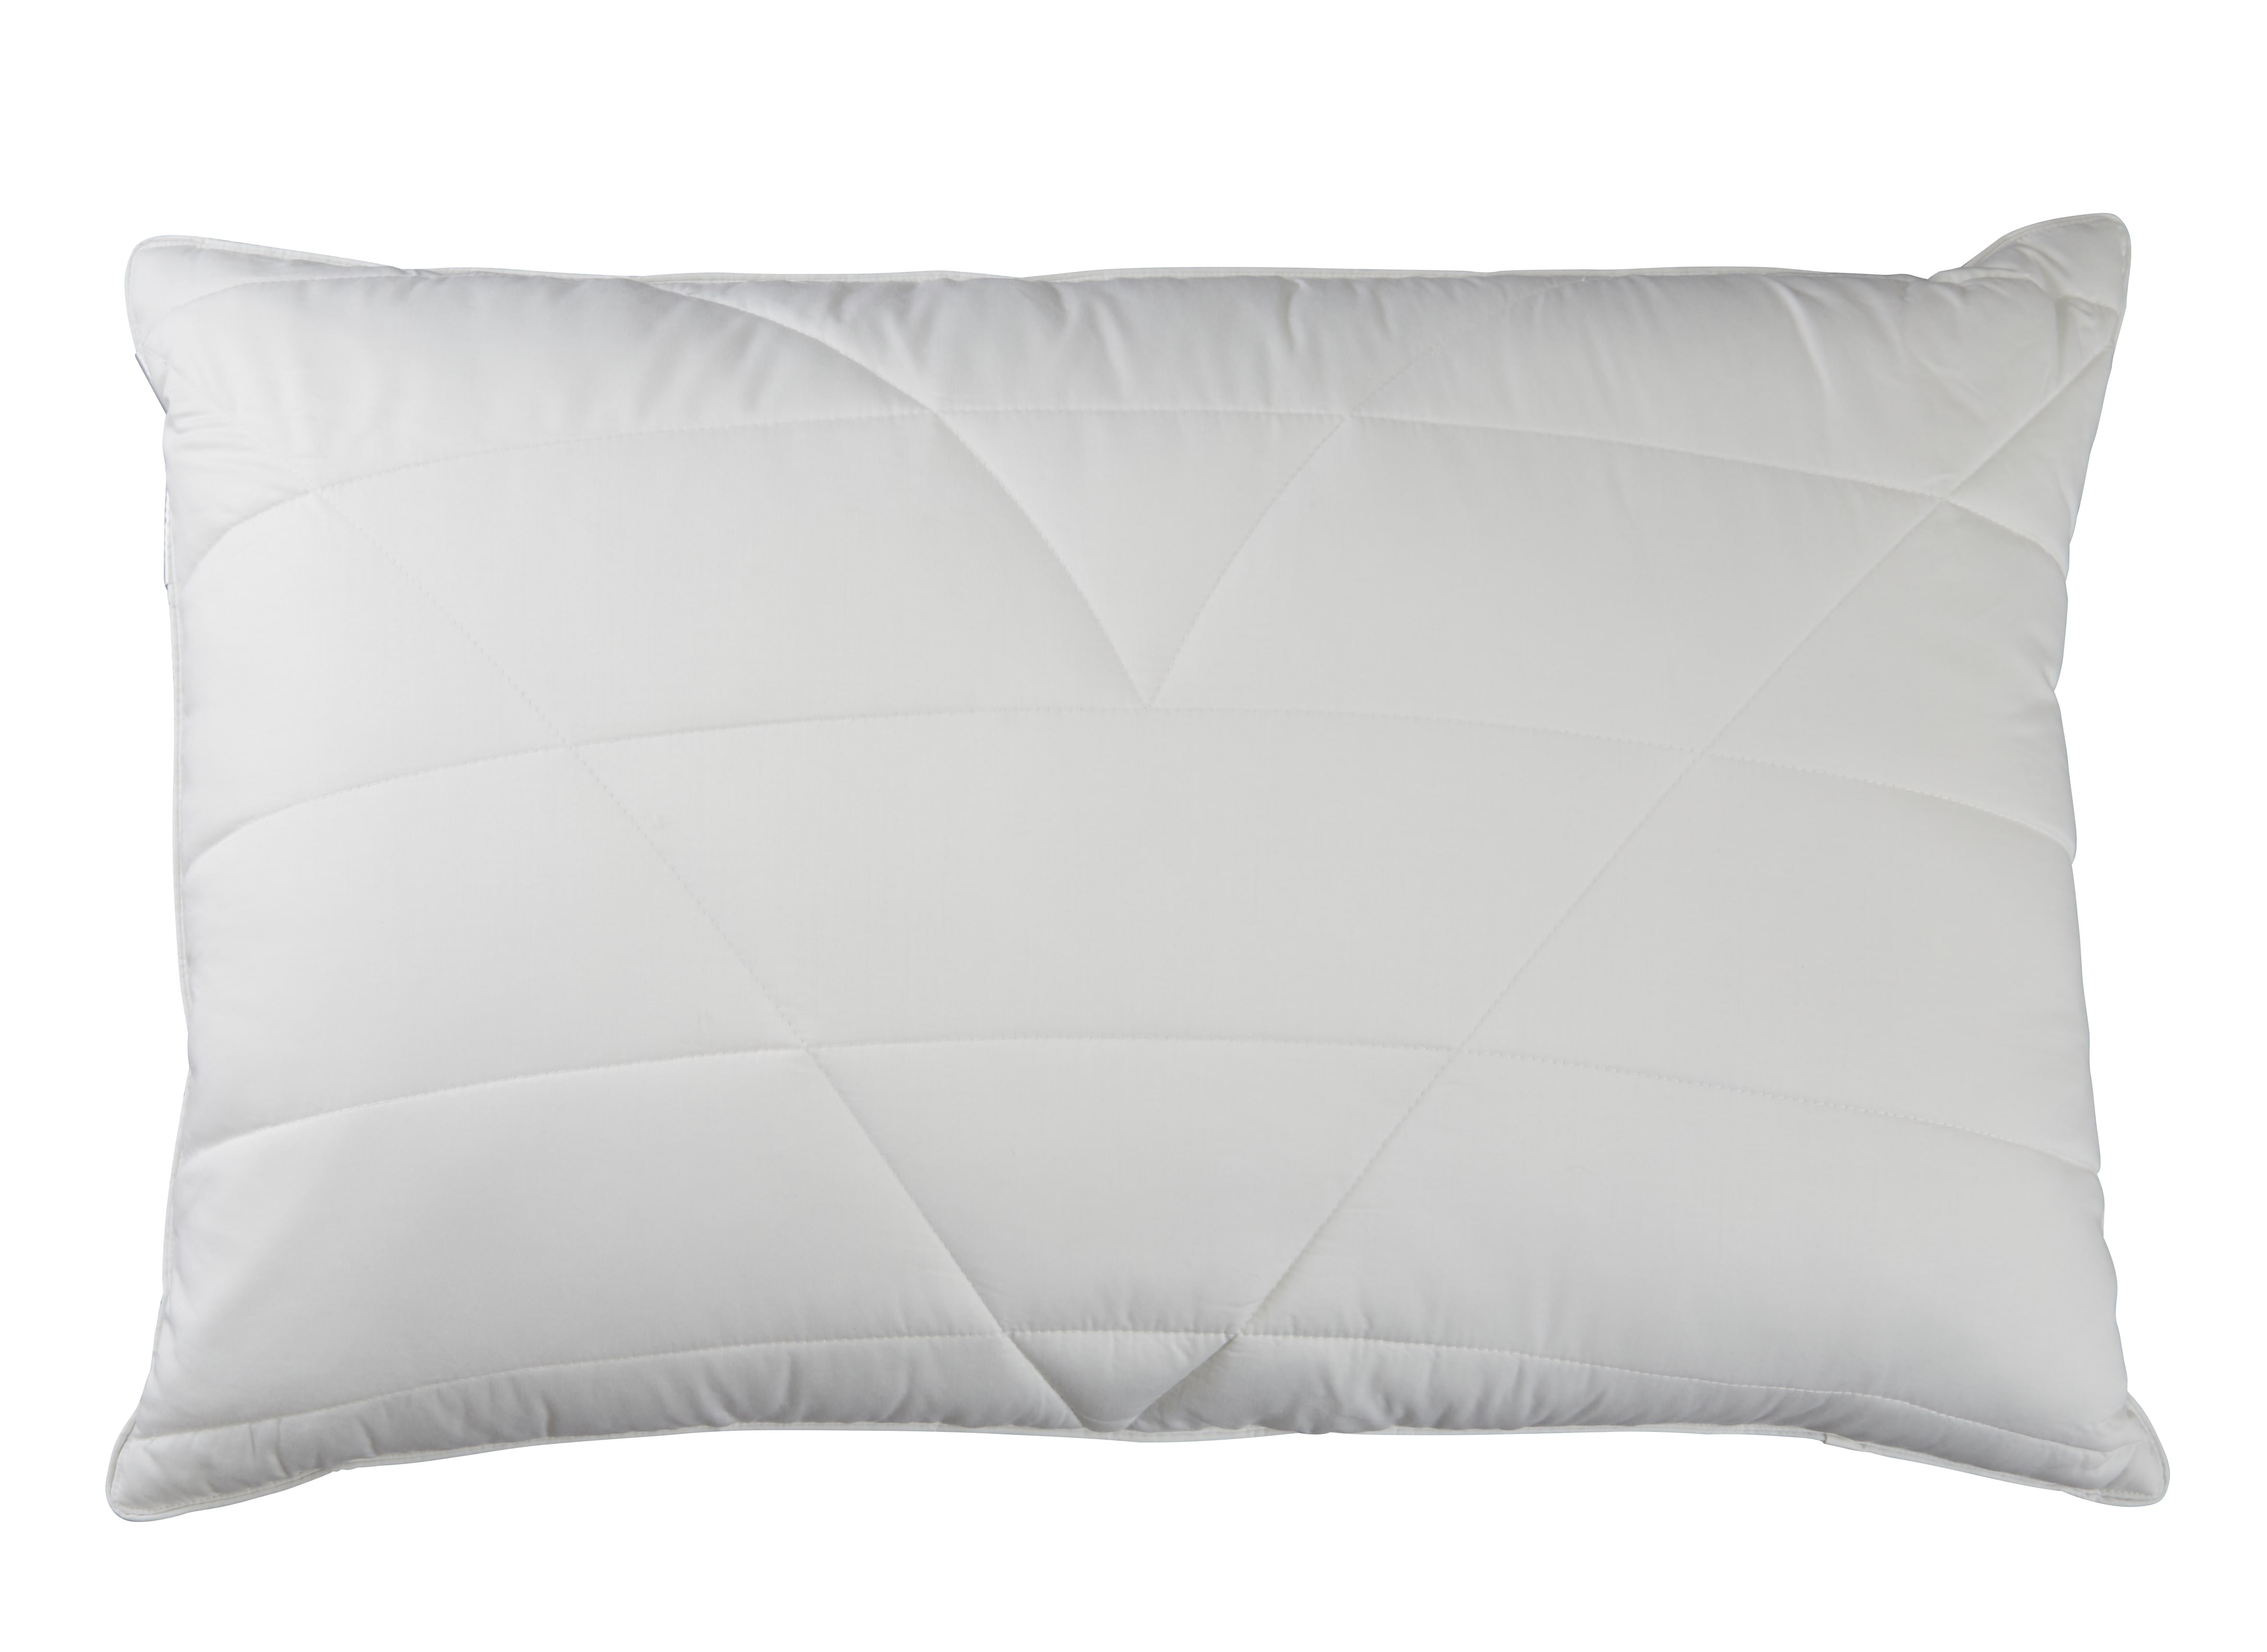 Bale of 6 Harwood Bamboo Quilted Pillow